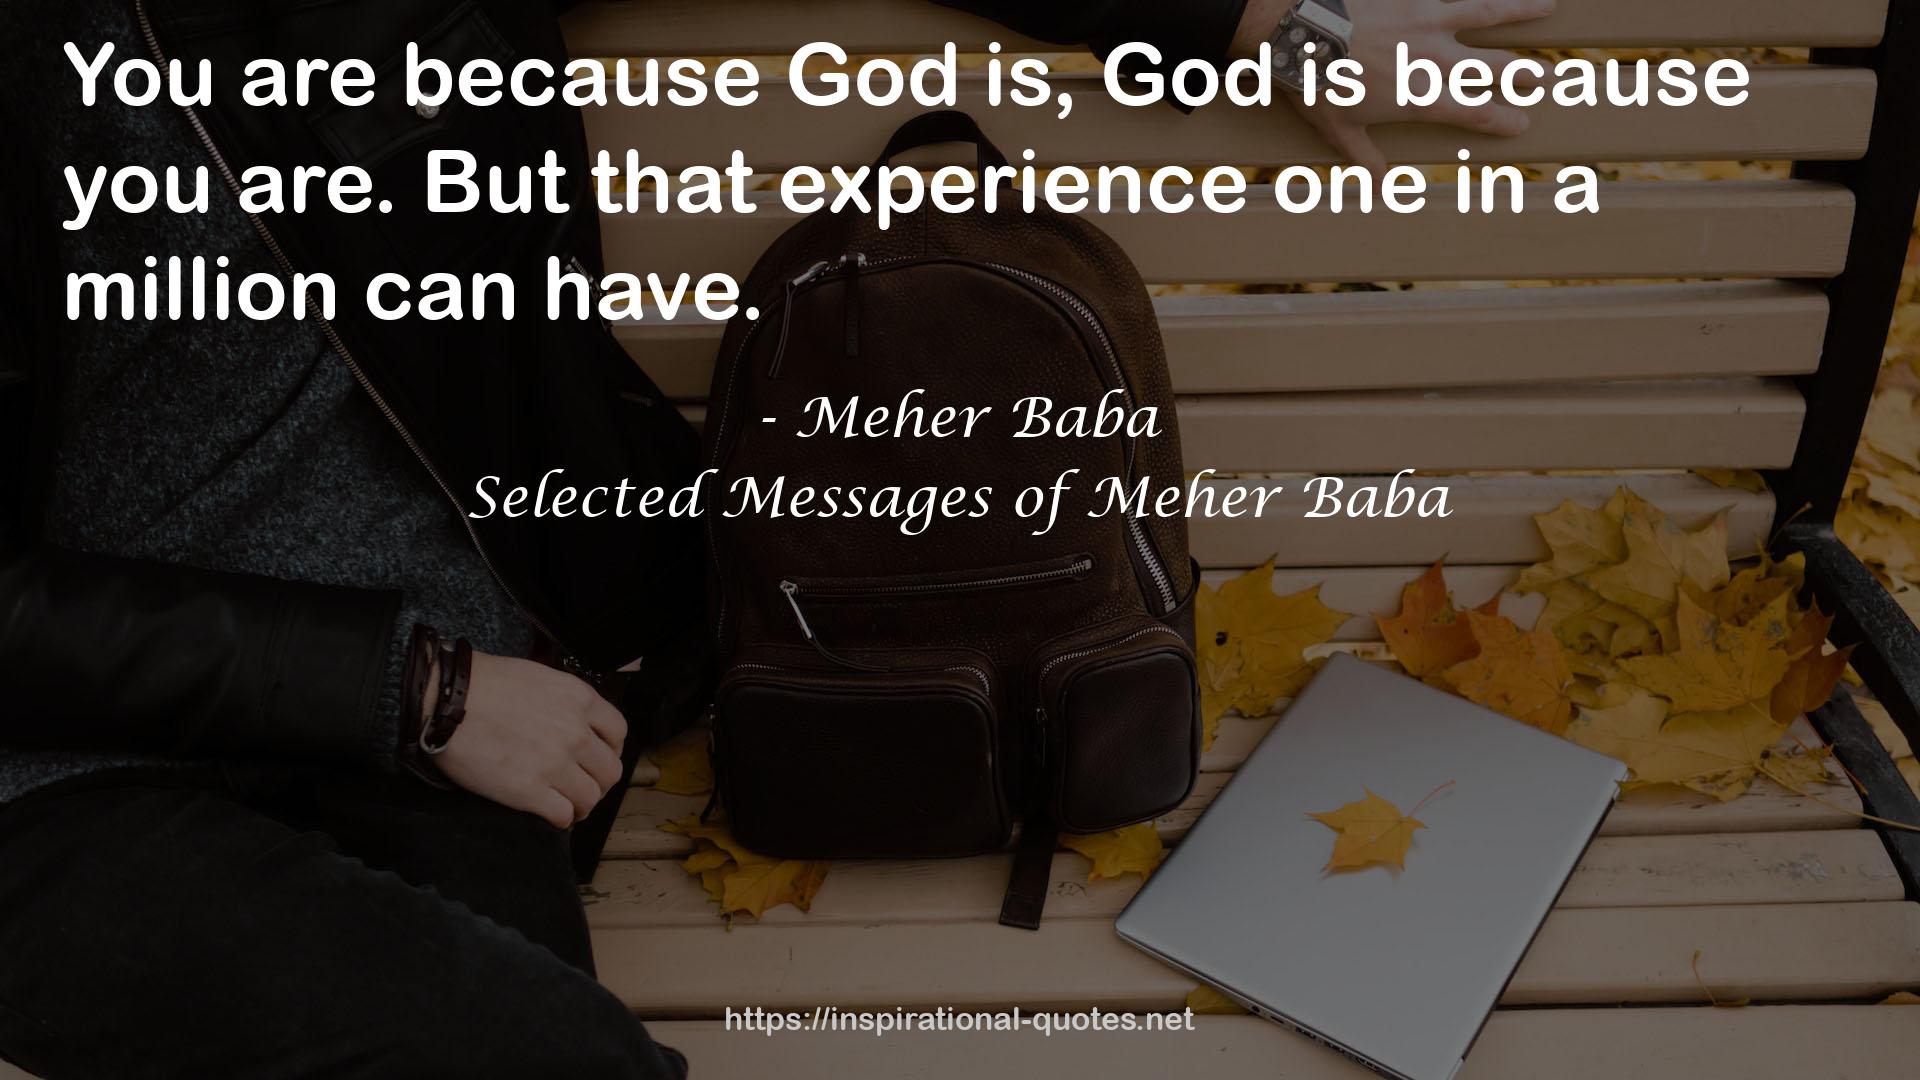 Selected Messages of Meher Baba QUOTES